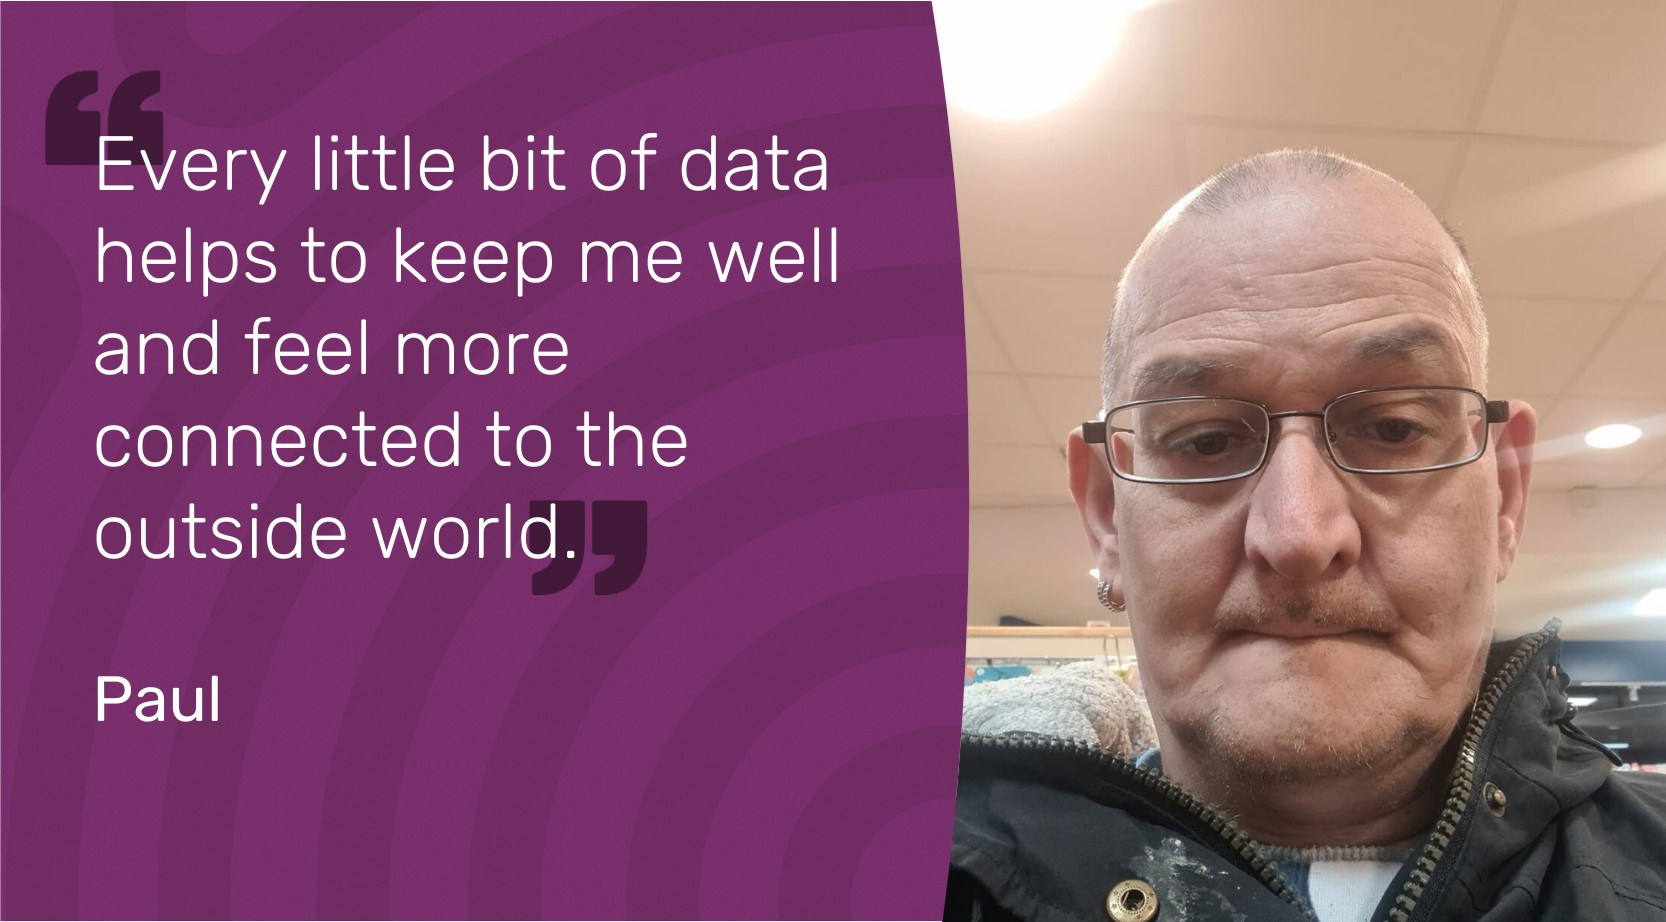 Every little bit of data helps to keep me well and feel more connected to the outside world. Quote by Paul